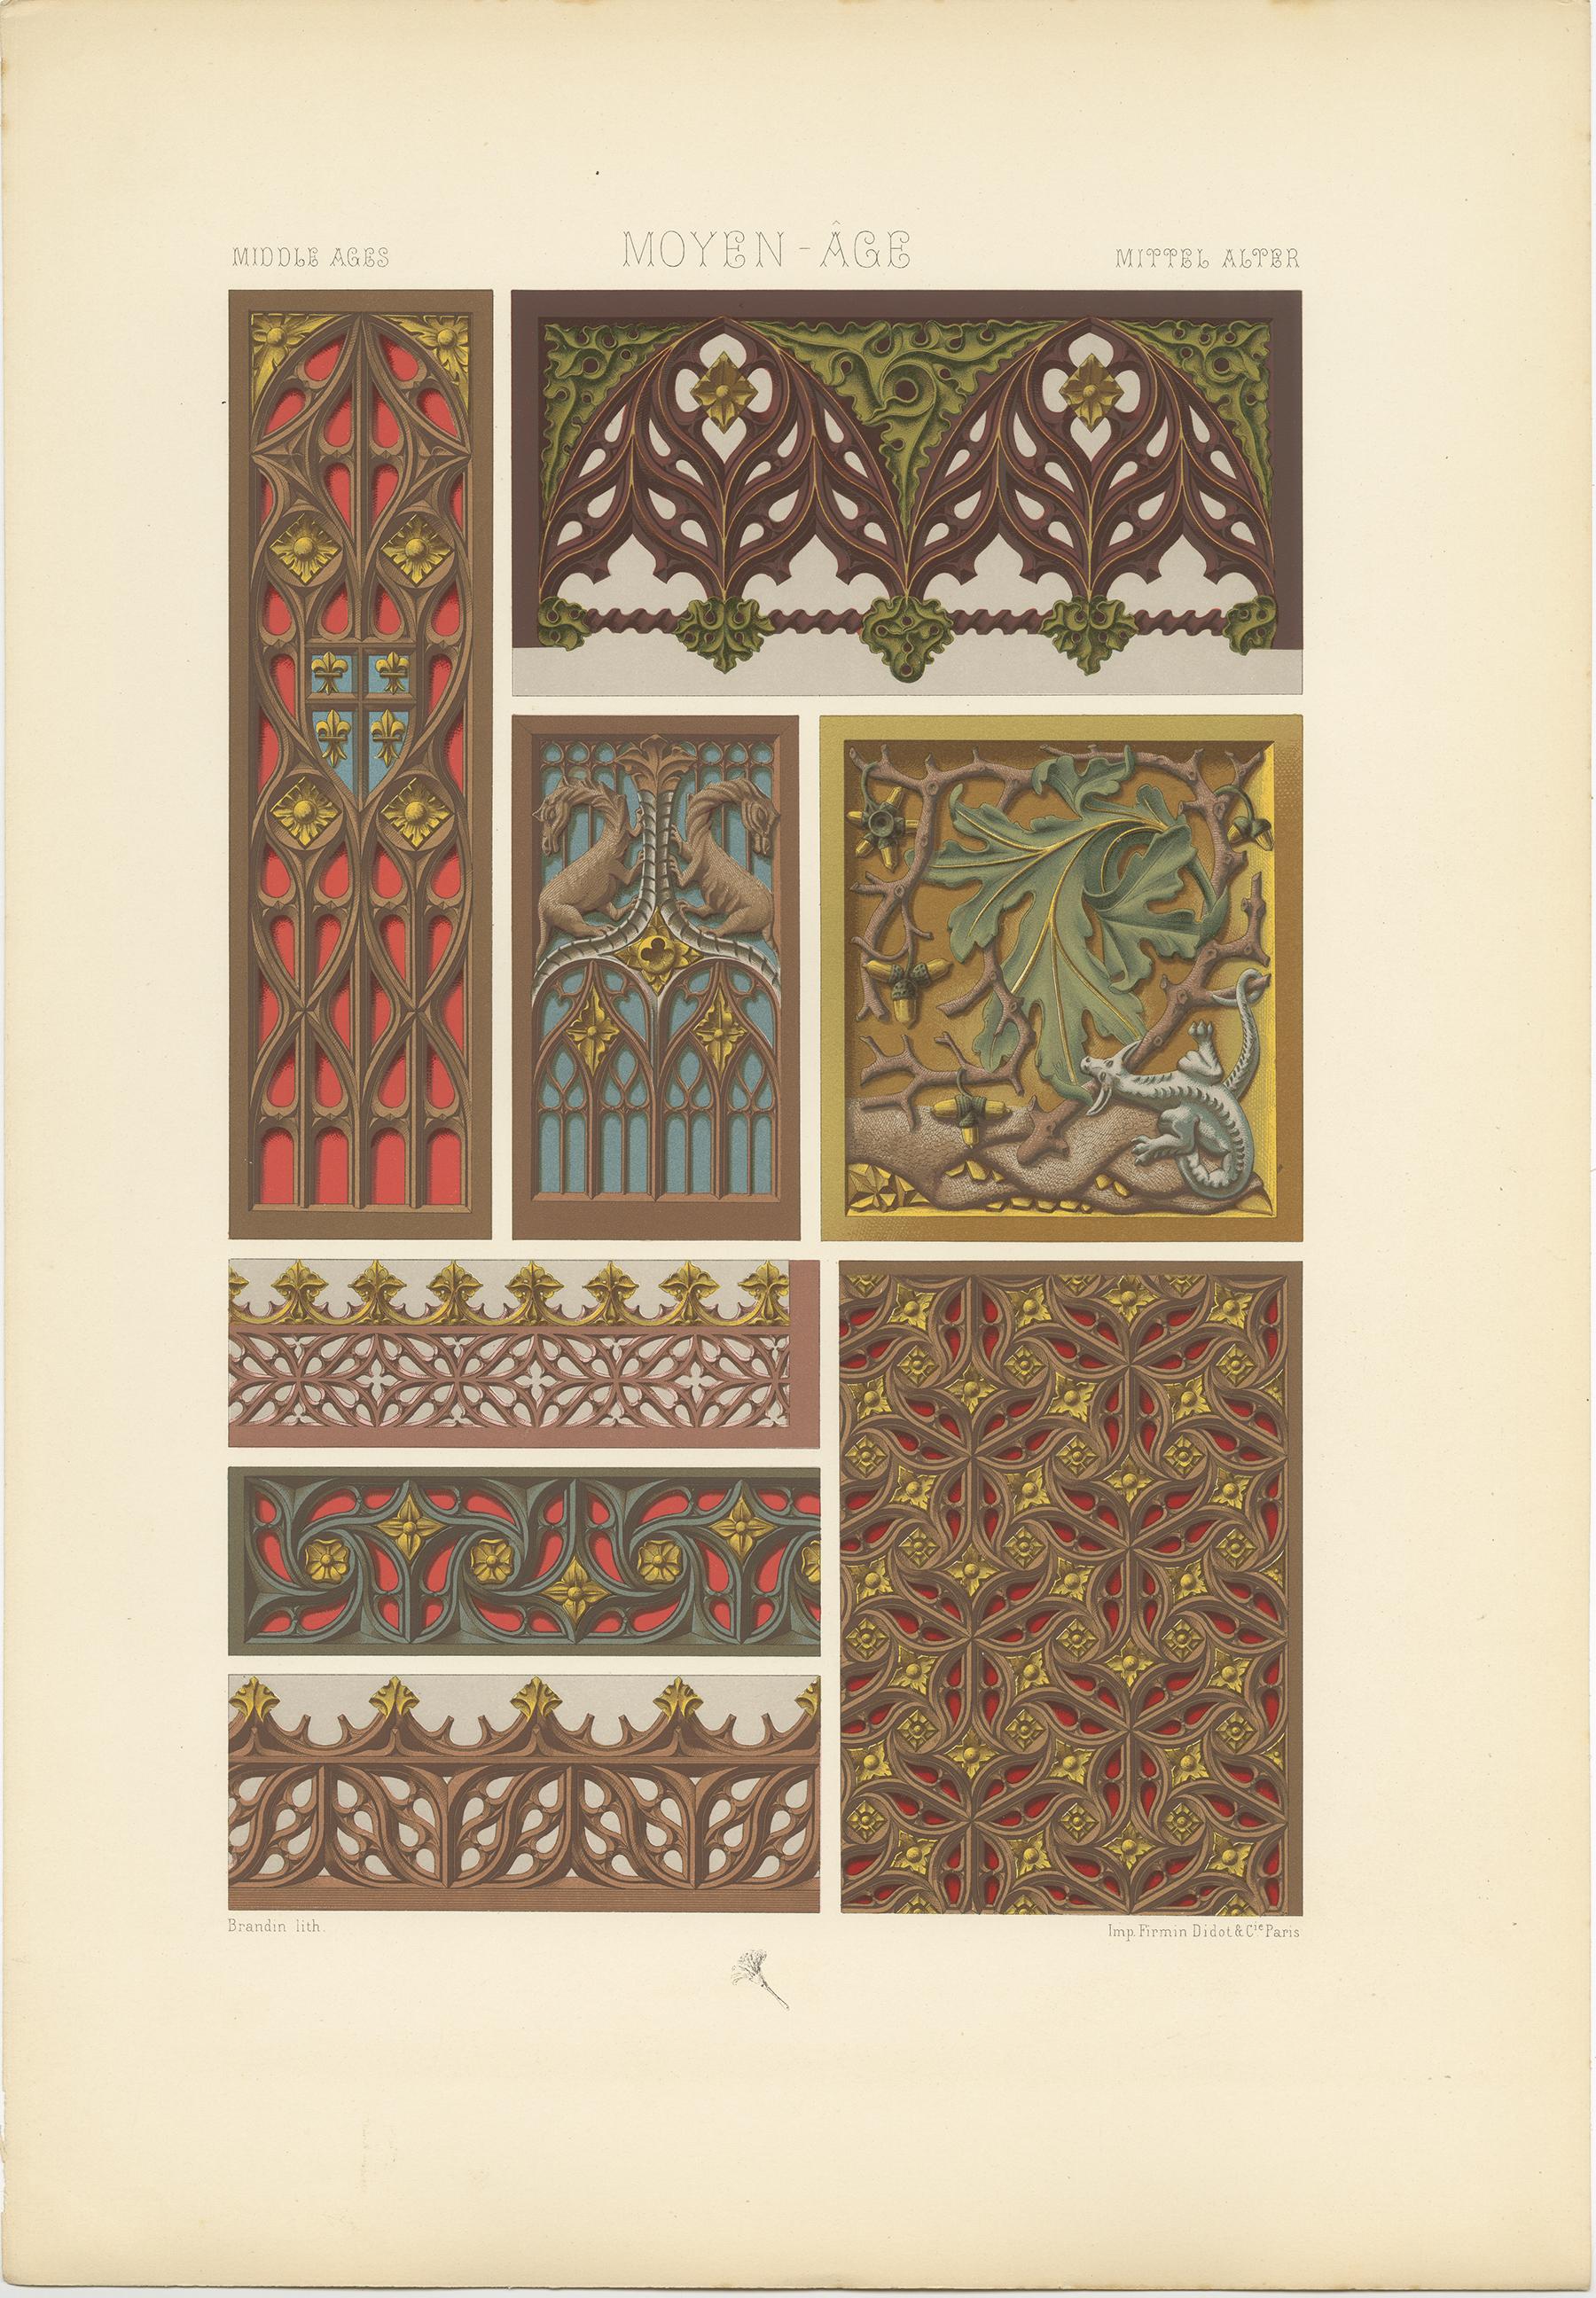 Antique print titled 'Middle Ages - Moyen Age - Mittel Alter'. Chromolithograph of painted and gilt woodwork 15th century ornaments.
This print originates from 'l'Ornement Polychrome' by Auguste Racinet. Published circa 1890.